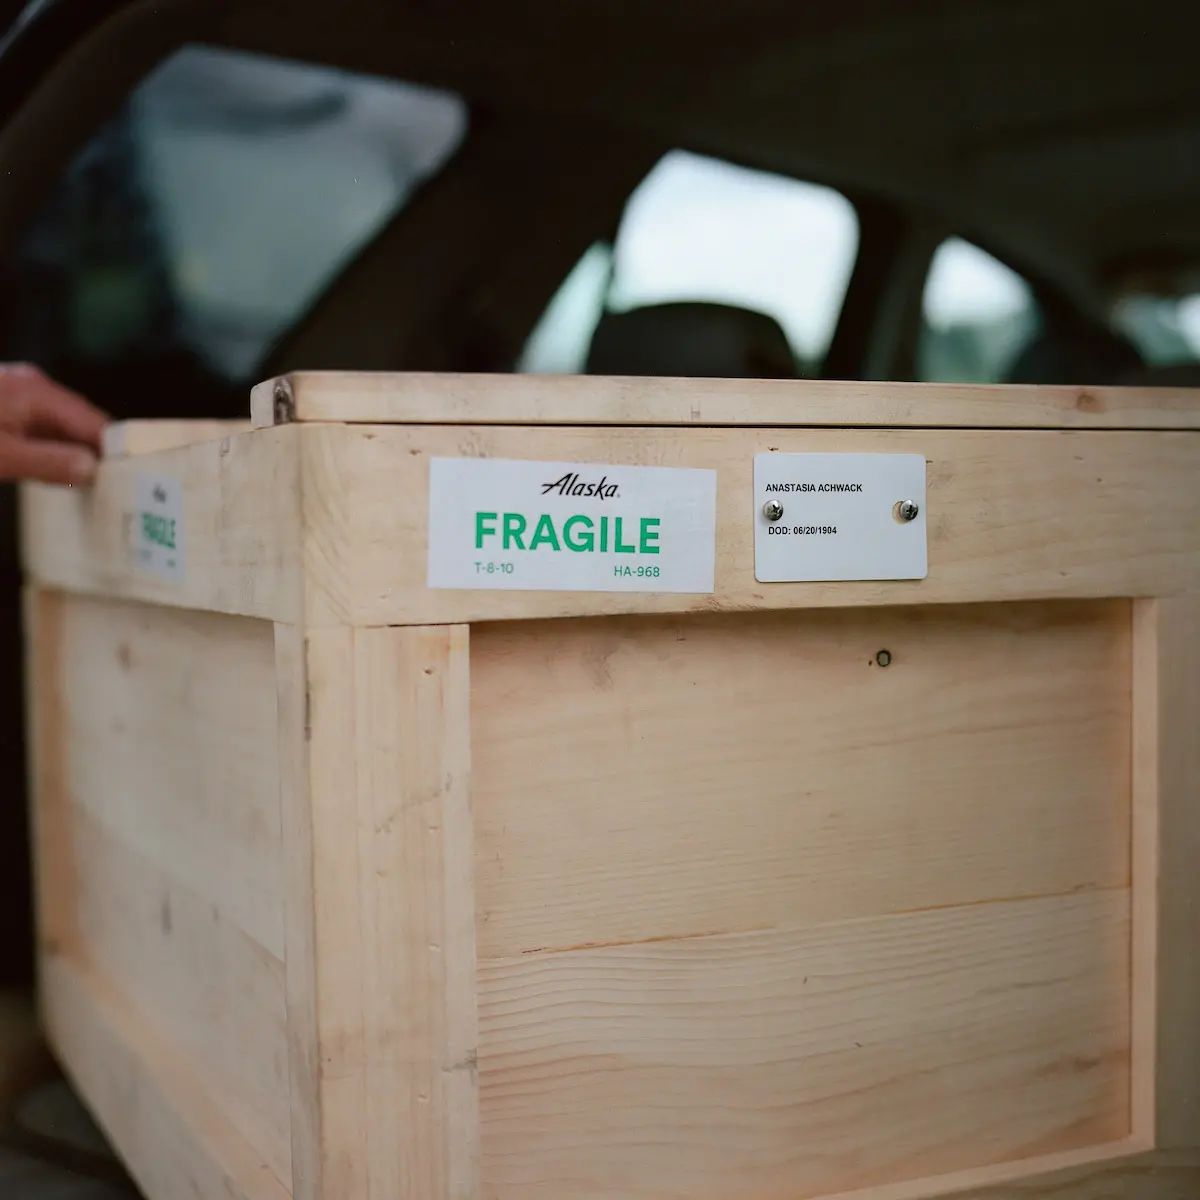 A plywood box with a green 'FRAGILE' label and Anastasia's name.